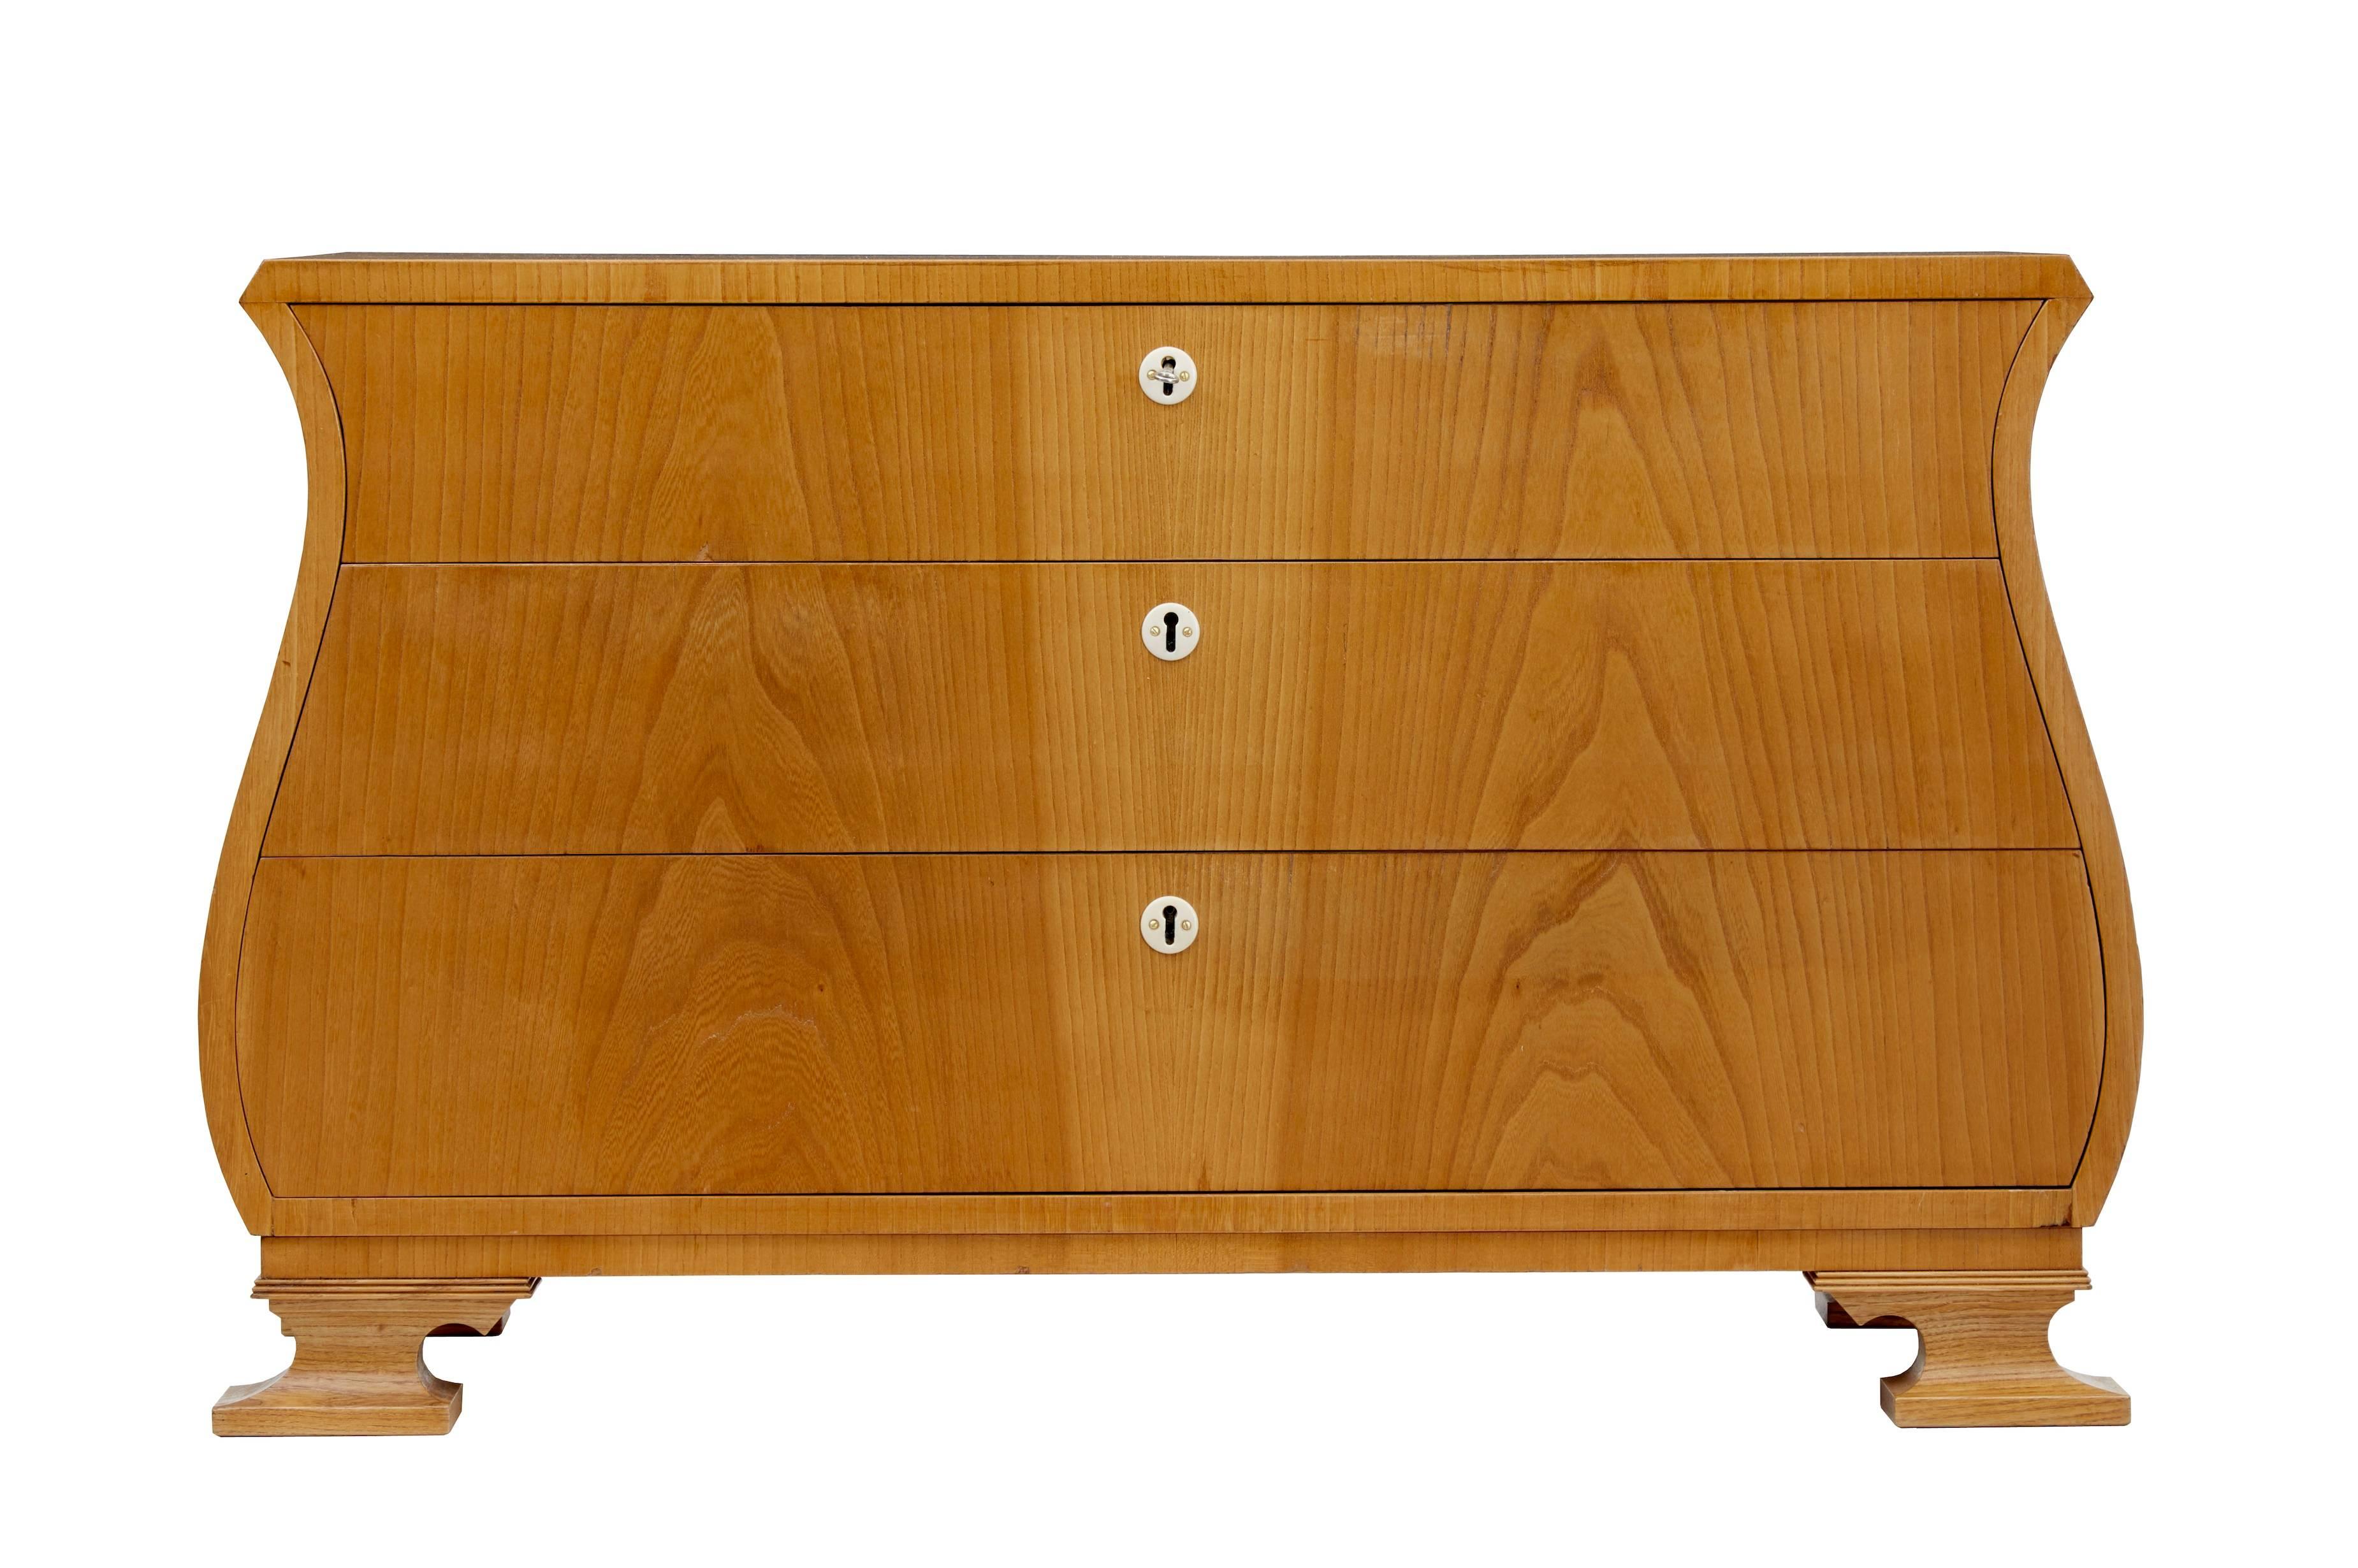 Rare elm veneered chest of drawers, circa 1950.
Three drawers that open on the key.
Desirable lyre shape, standing on sledge feet.
Minor surface marks and repairs to veneer.

Measures: Height 24 3/4"
width 40 1/2"
depth 16